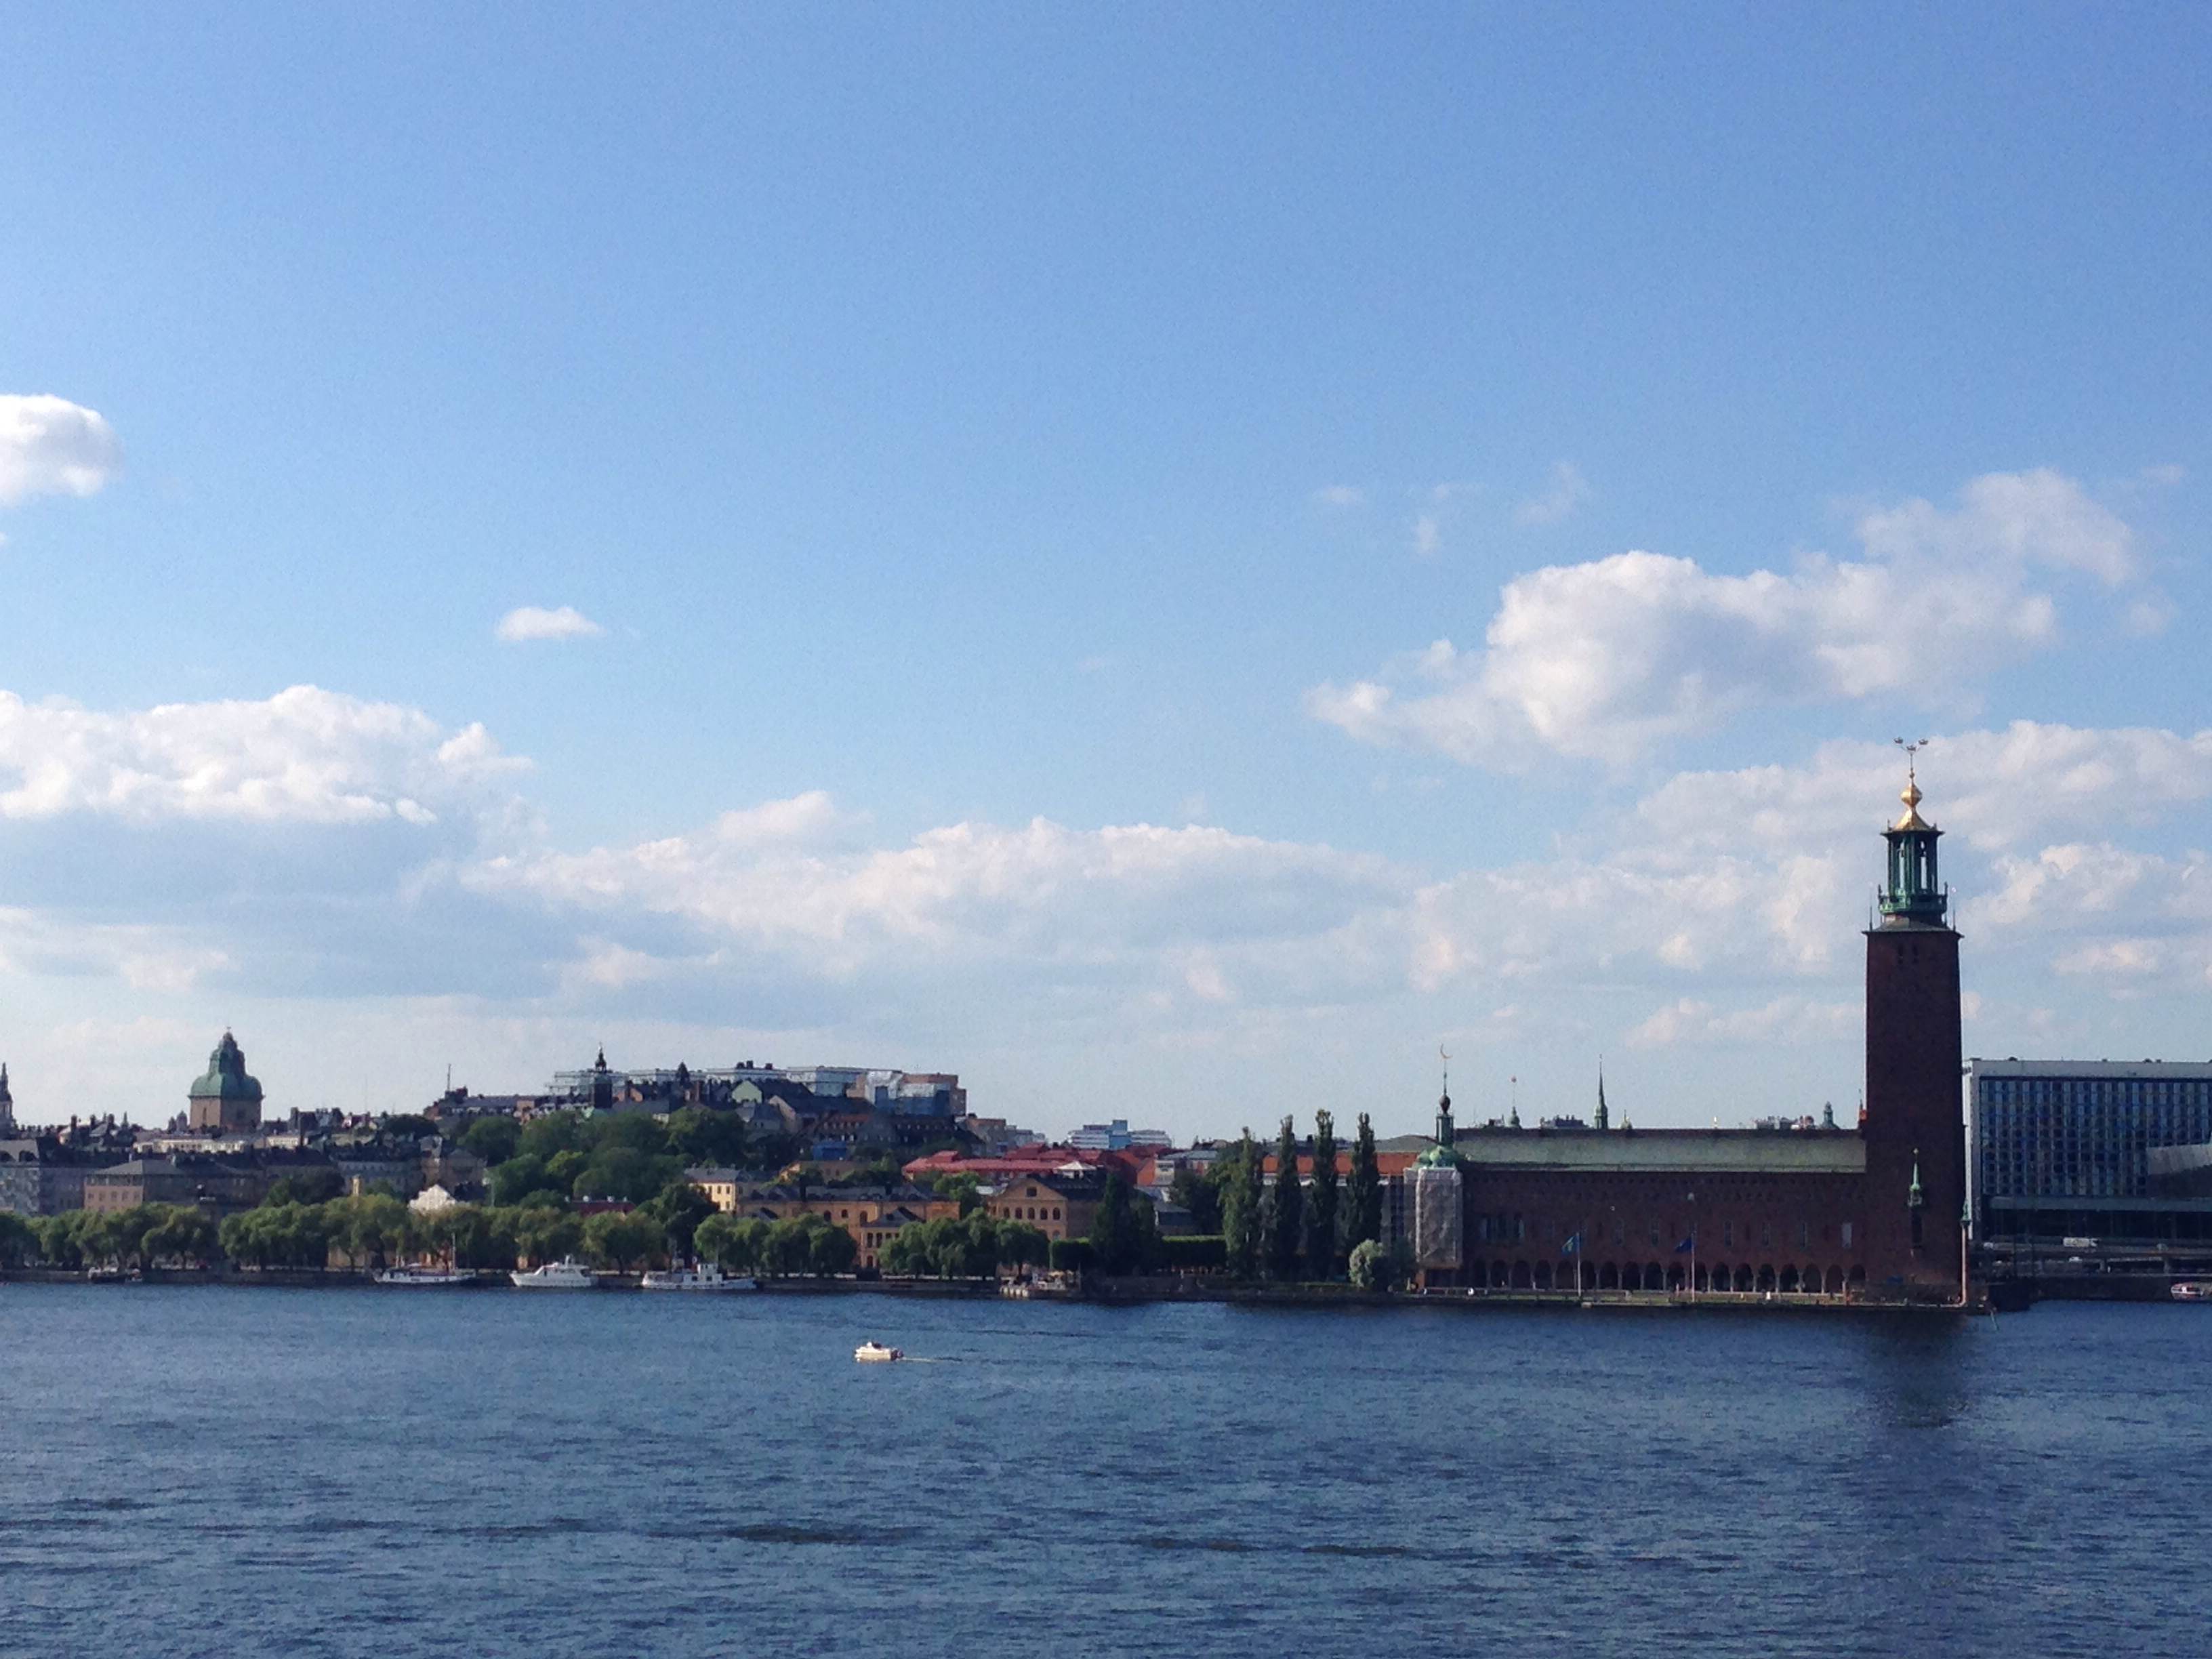 Stockholm City Hall as seen from Södermalm